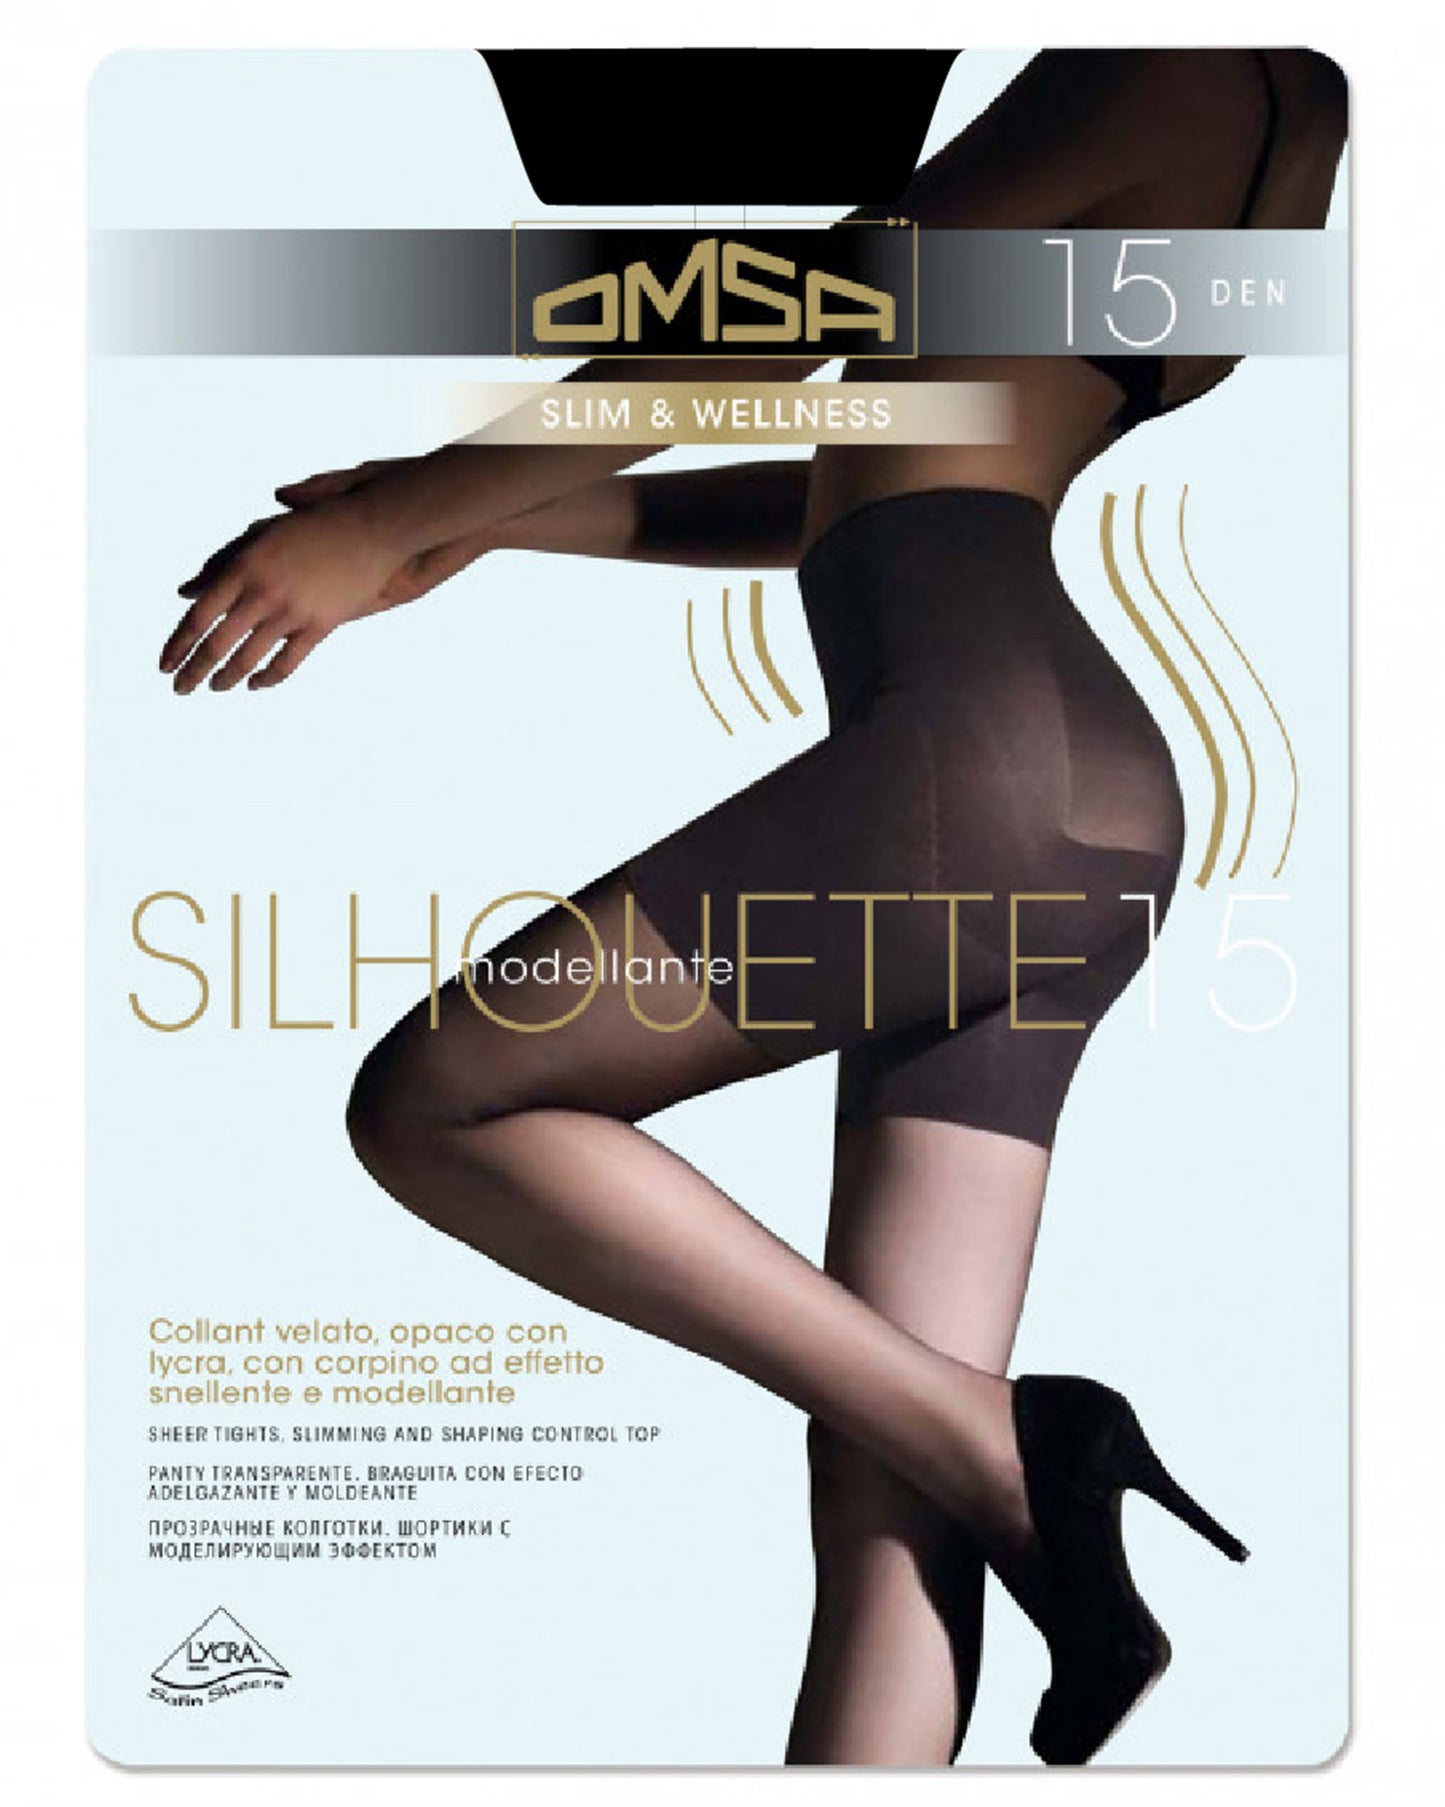 Omsa Silhouette 15 Collant Packaging - Slimming & Wellness Sheer Control-Top Tights in black, nude, tan